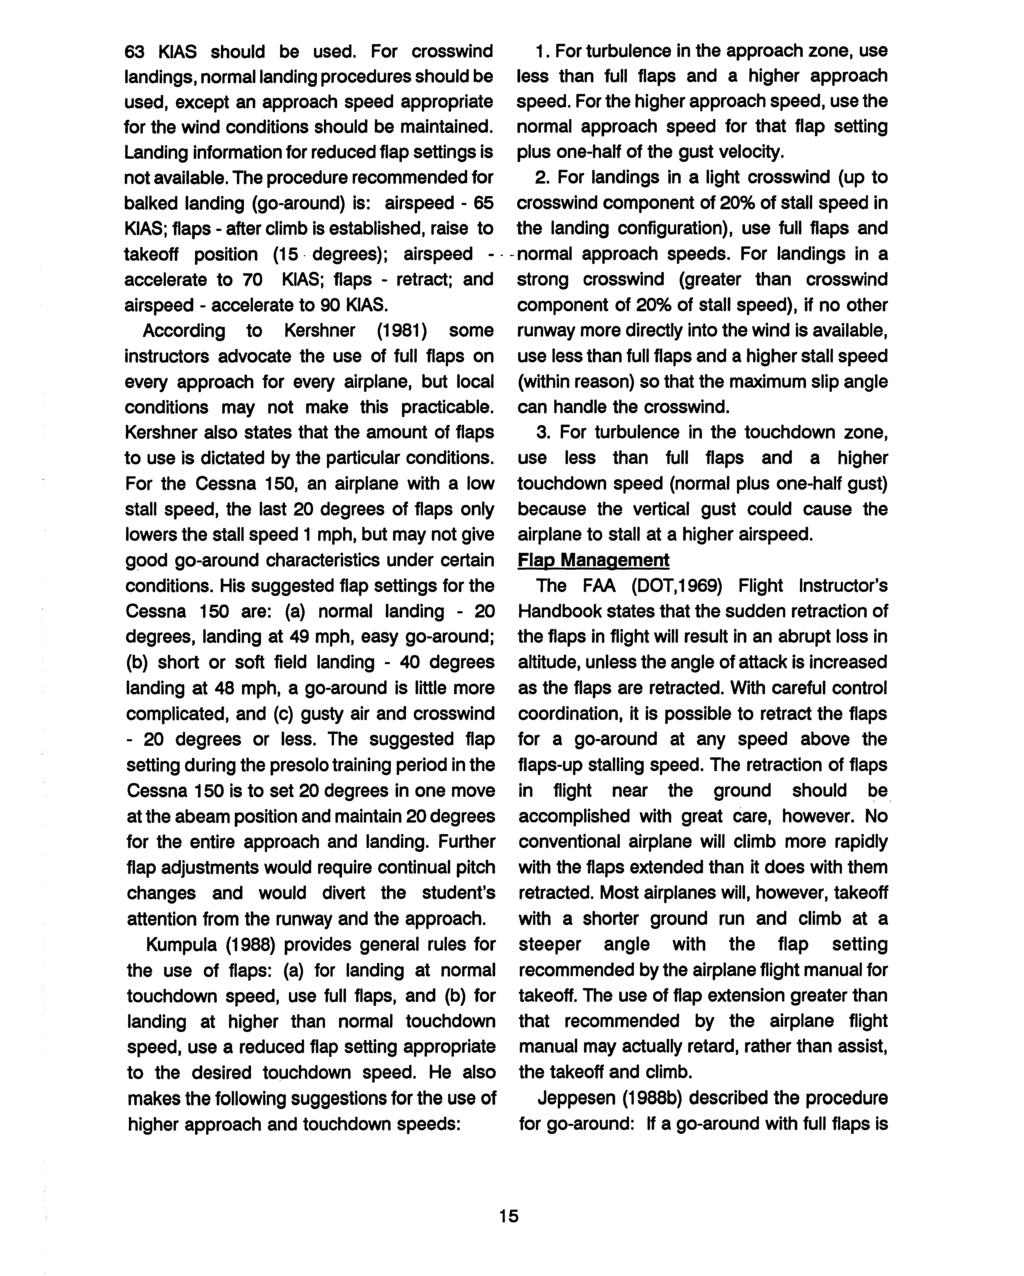 63 KIAS should Journal of Aviation/Aerospace Education & Research, Vol. 1, No. 3 [1991], Art. 1 be used. For crosswind 1.